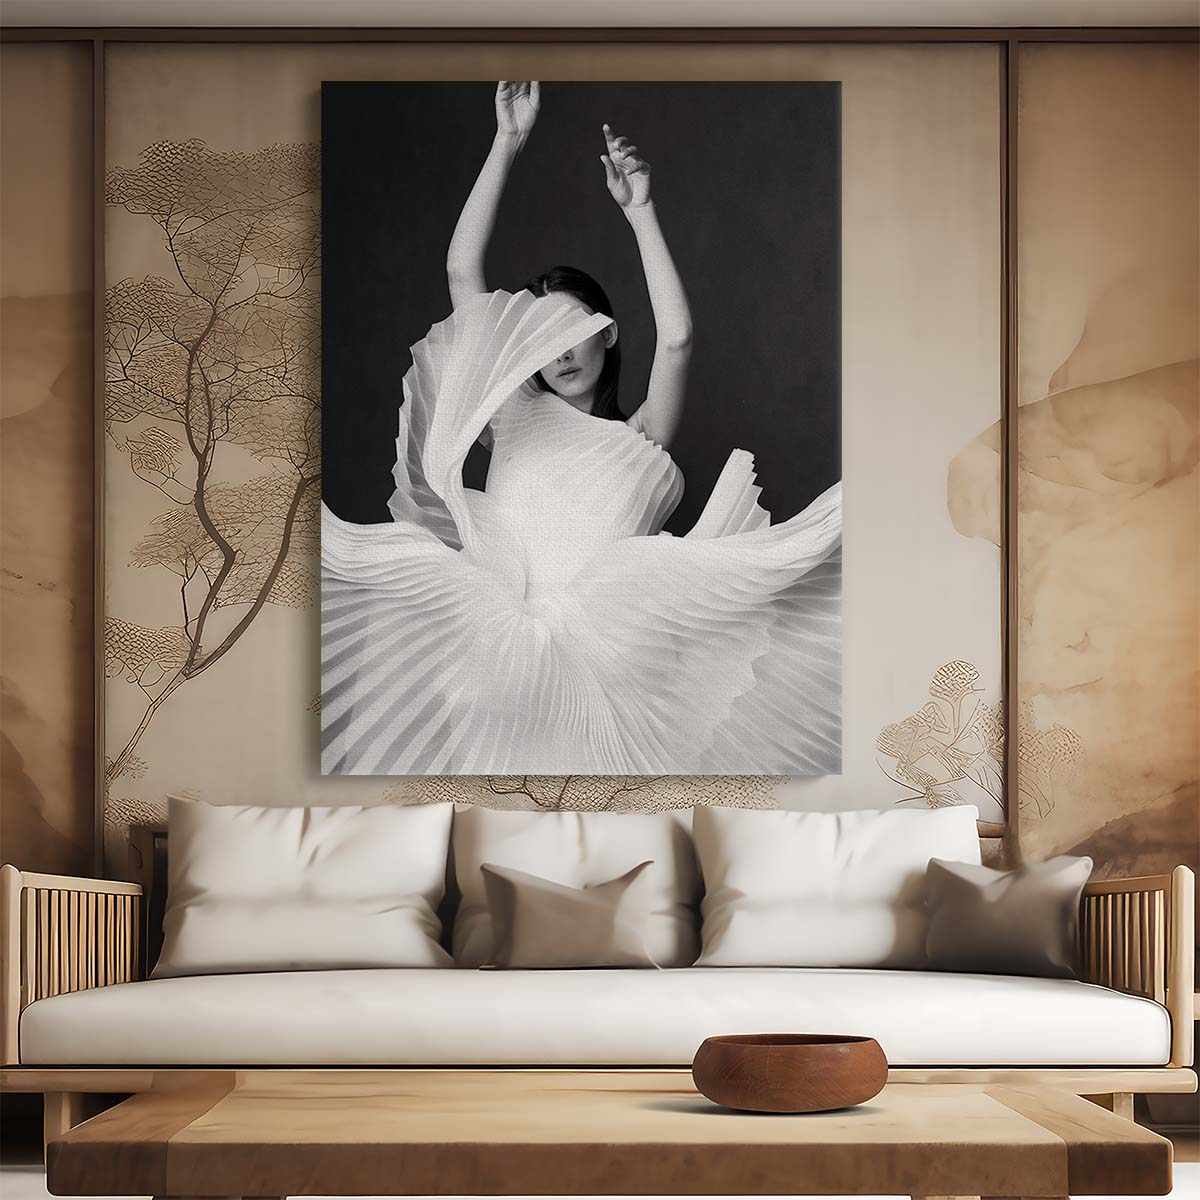 Monochrome Fashion Model Photography Anonymous Dancing Woman Portrait by Luxuriance Designs, made in USA